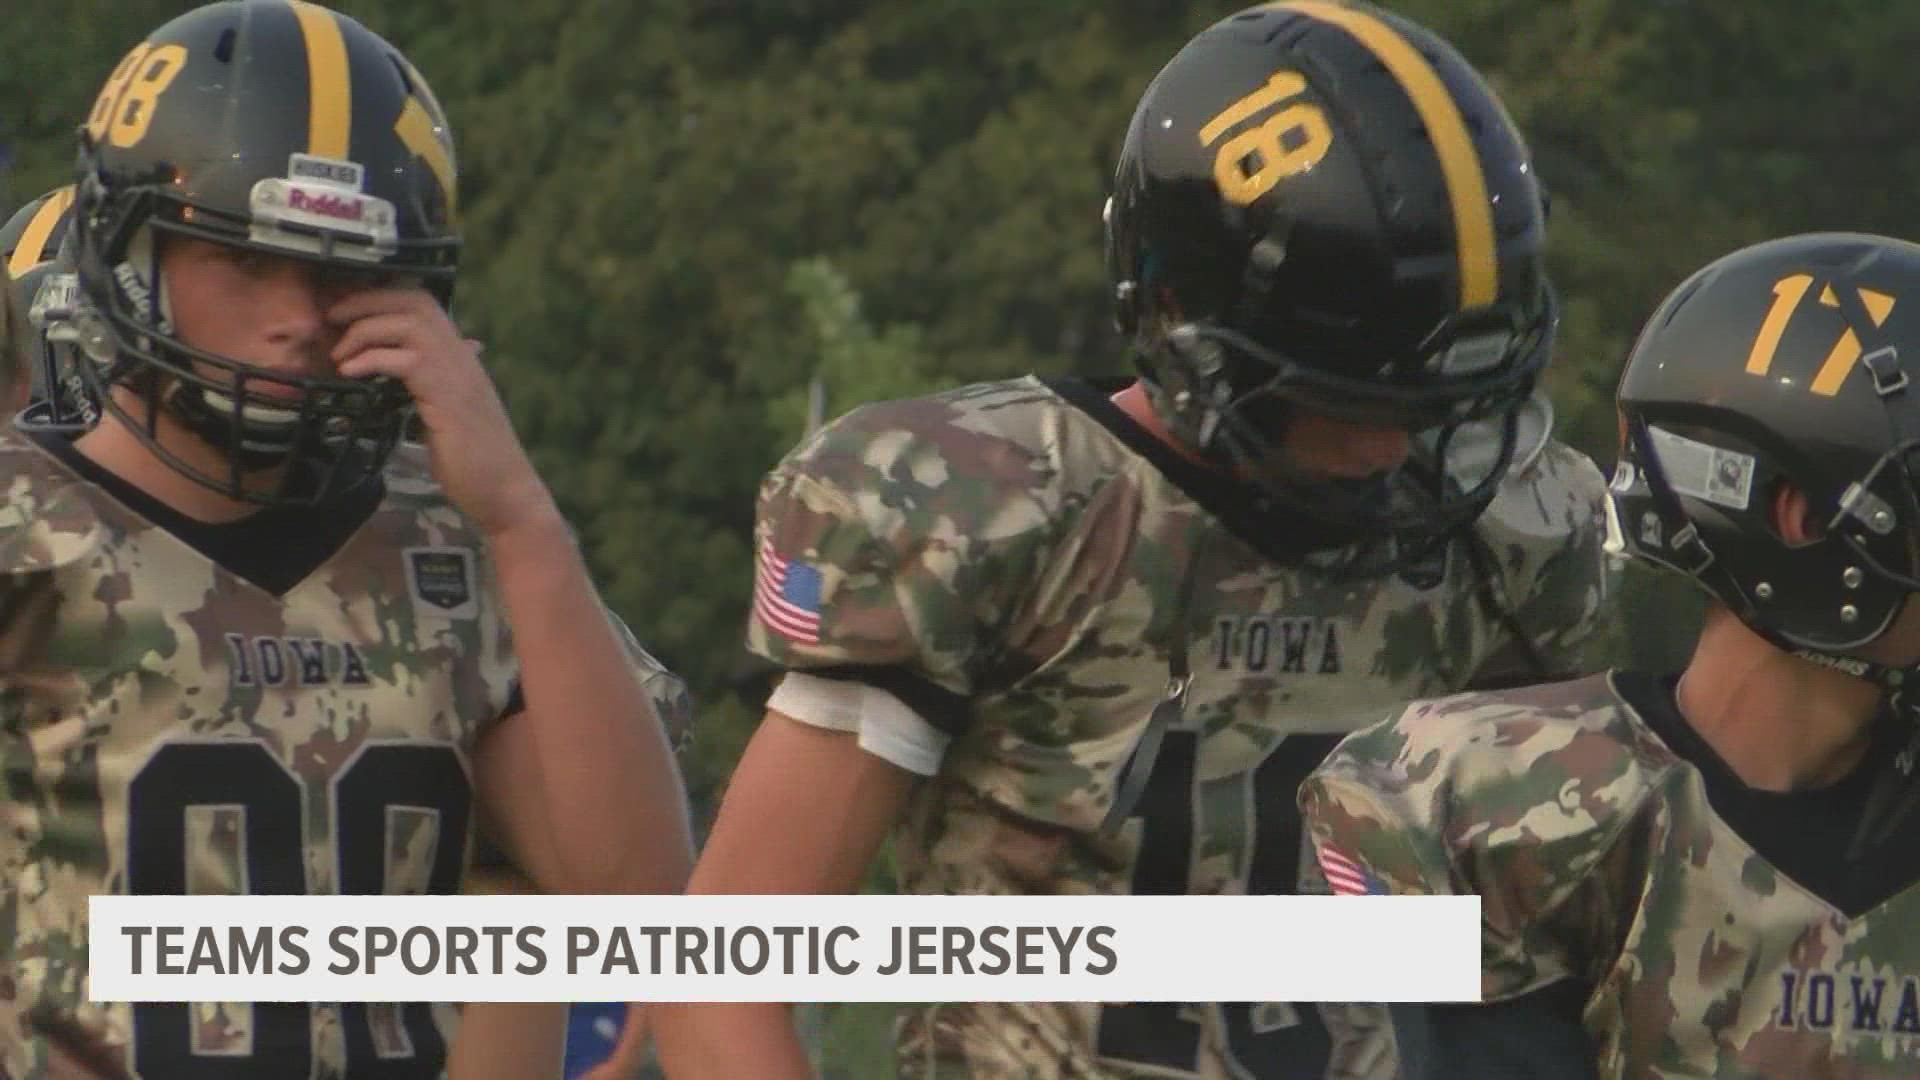 The jerseys will be worn by a different football team each week for the rest of the season.